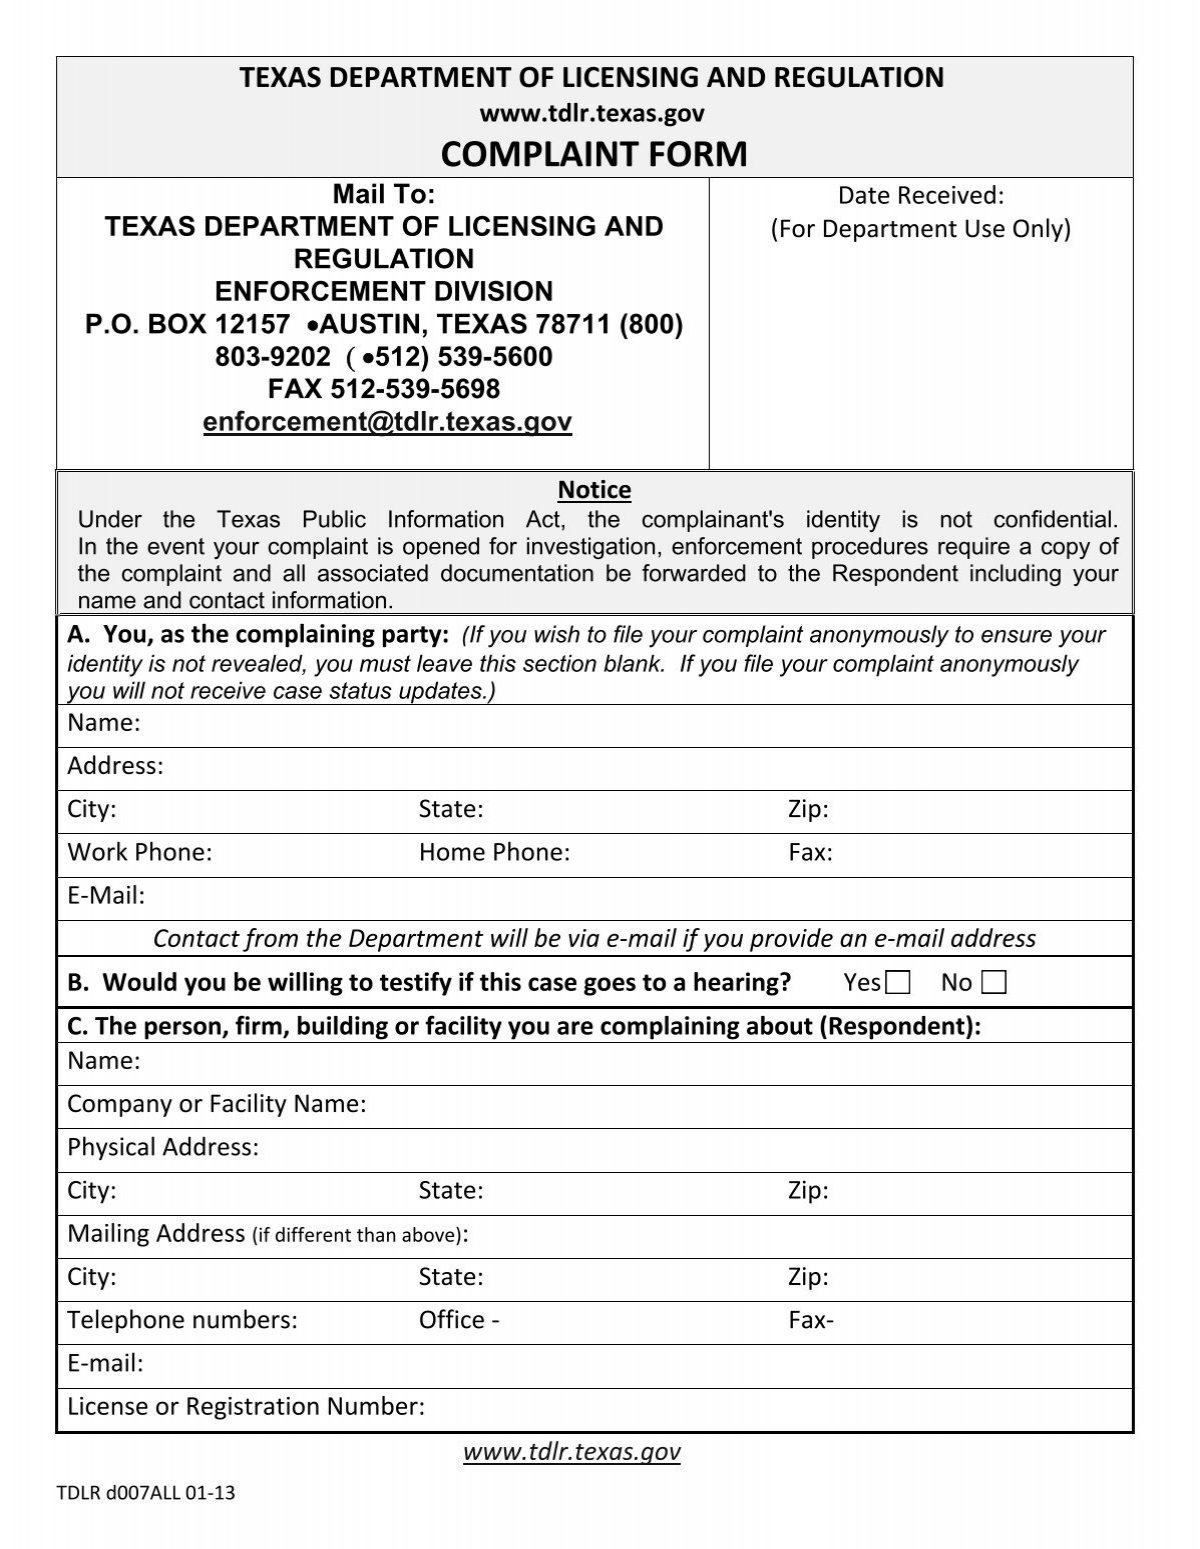 Texas Department Of Licensing And Regulation Near Me